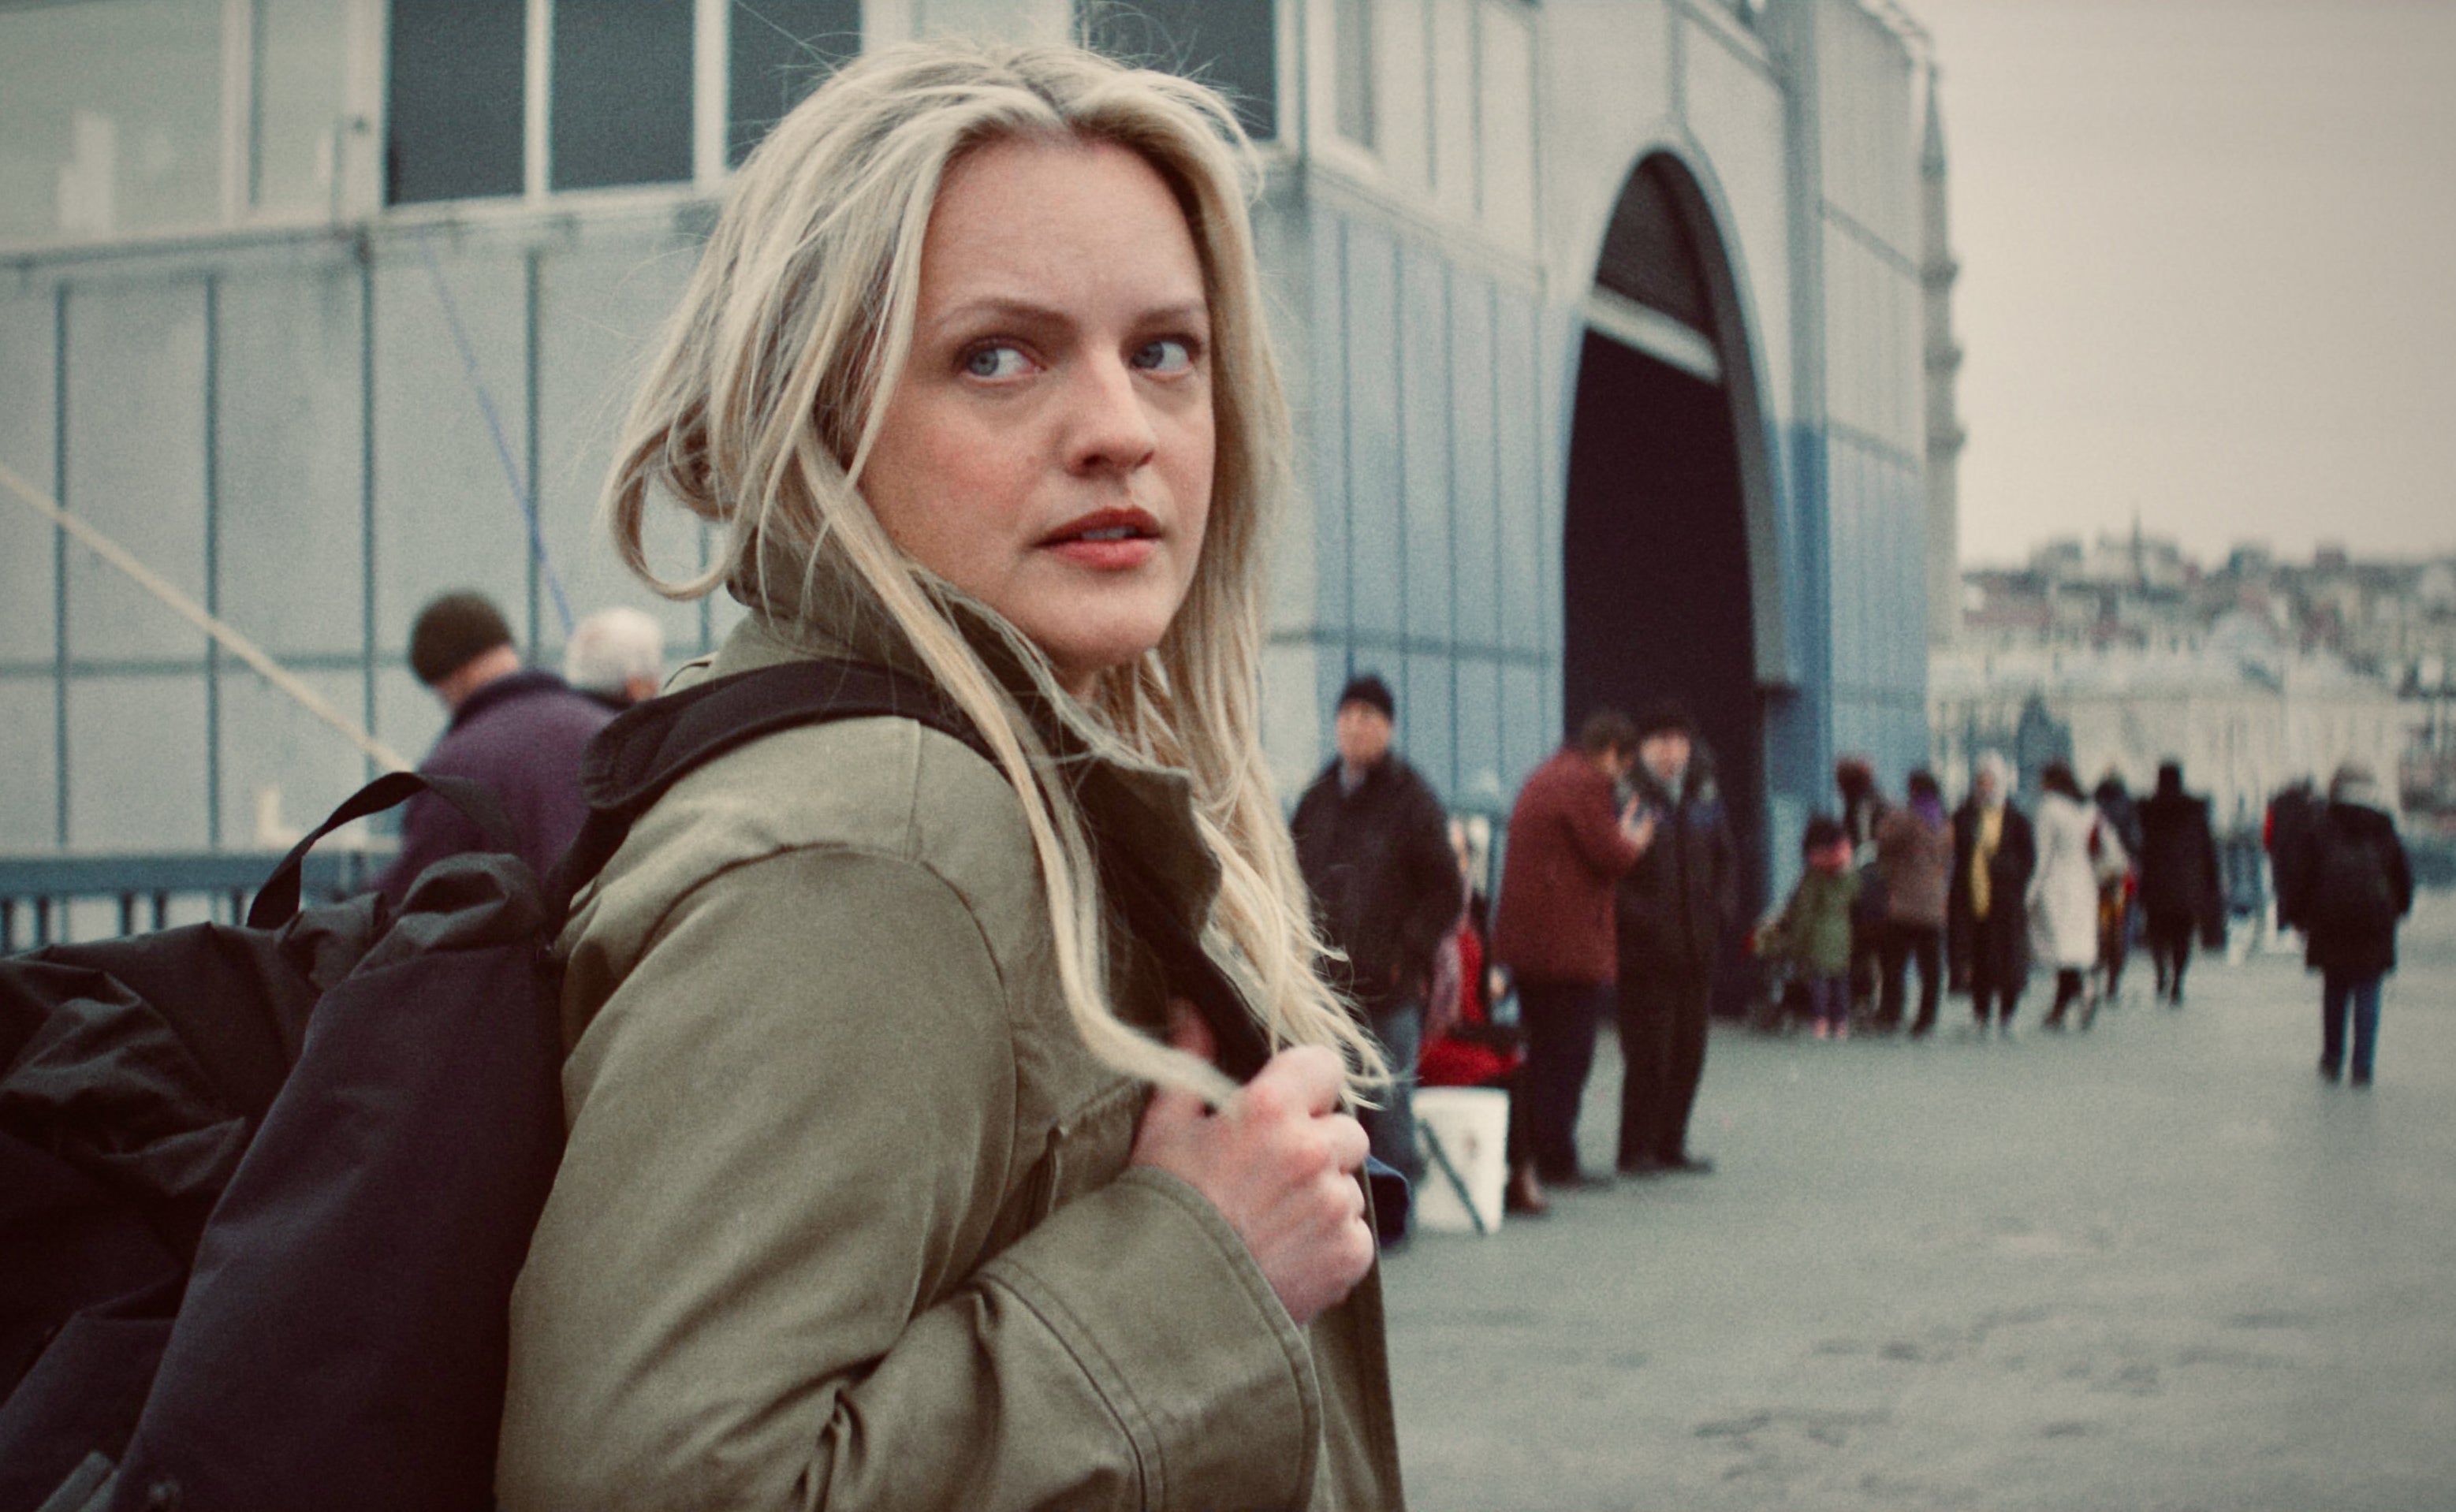 Elisabeth Moss in a scene, looking over shoulder with concerned expression, people in background in The Veil